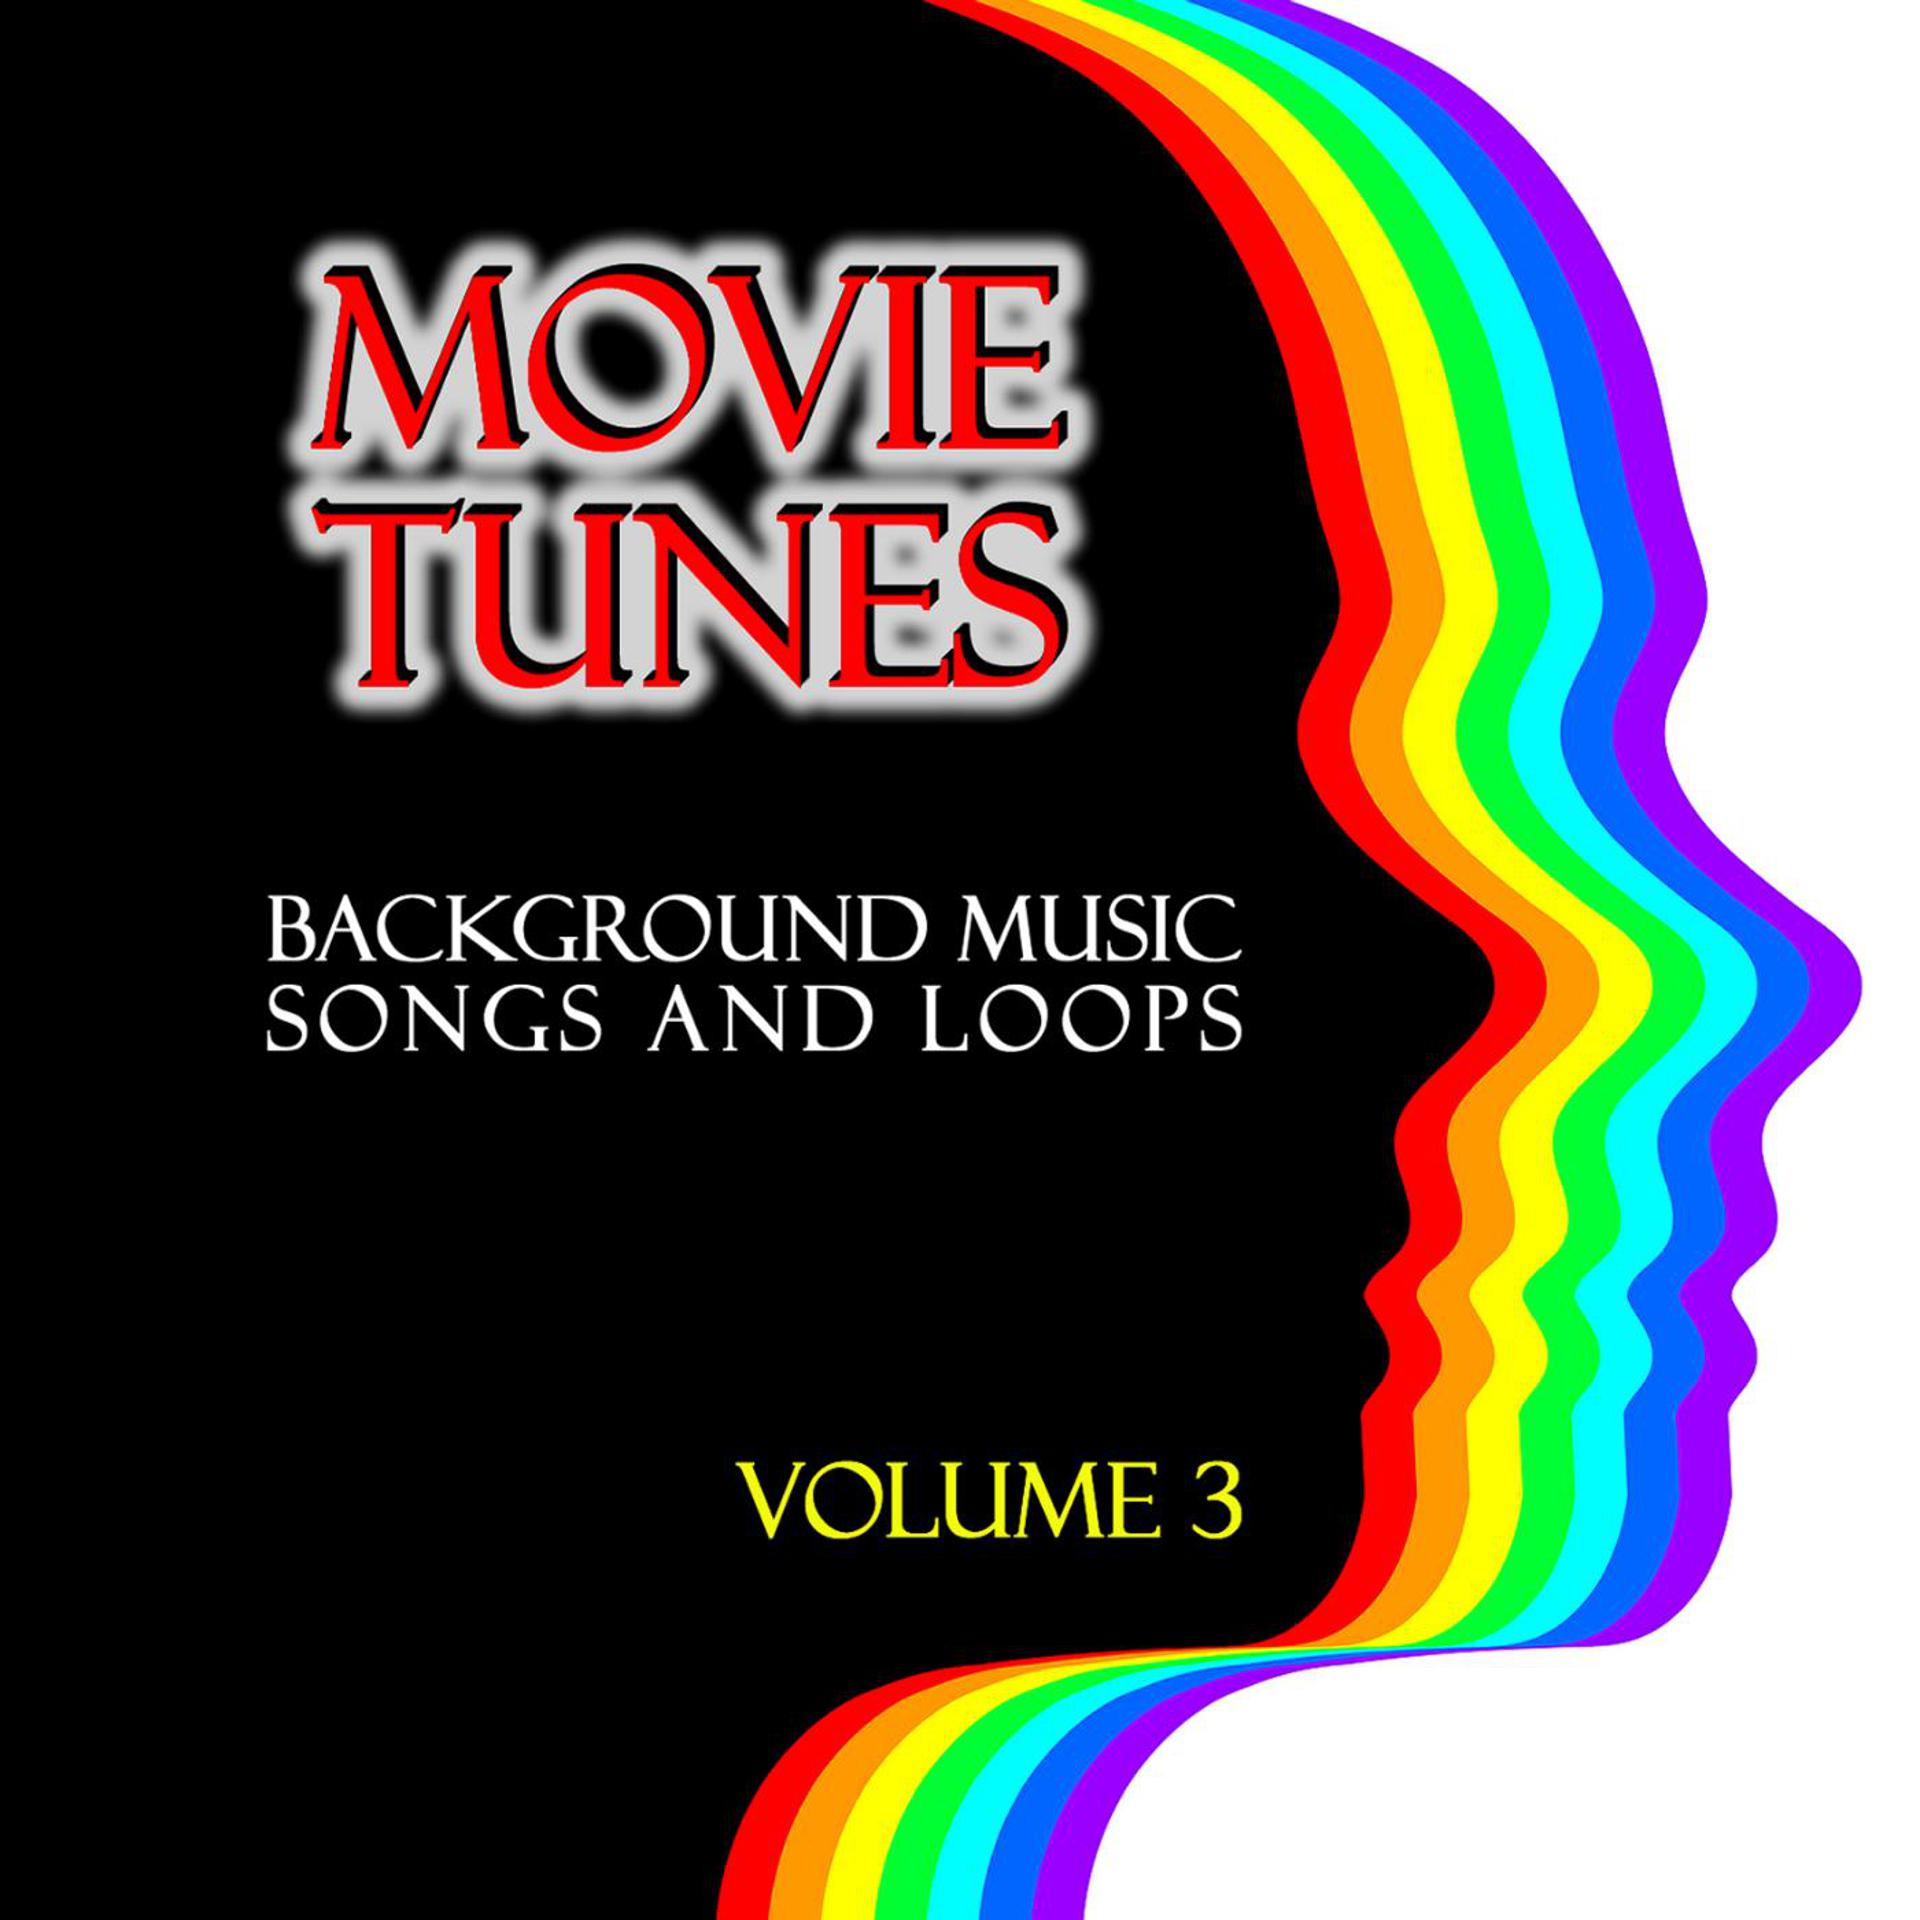 Постер альбома Movie Tunes Royalty Free Background Music Songs and Loops. Vol. 3. Classic Moods. Instrumentals for TV, Film, Web & More.